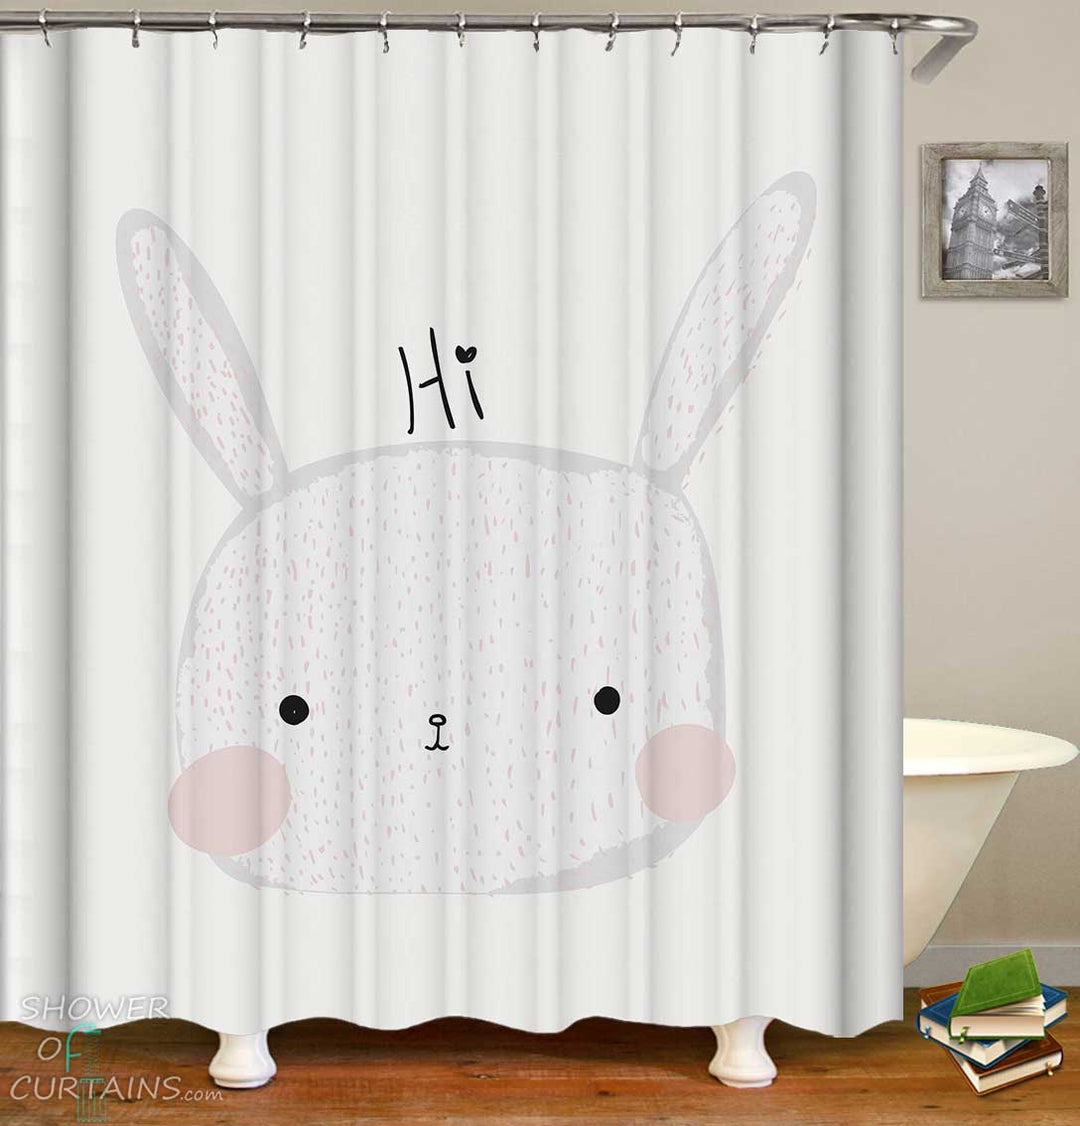 Shower Curtains with Adorable Kids Rabbit